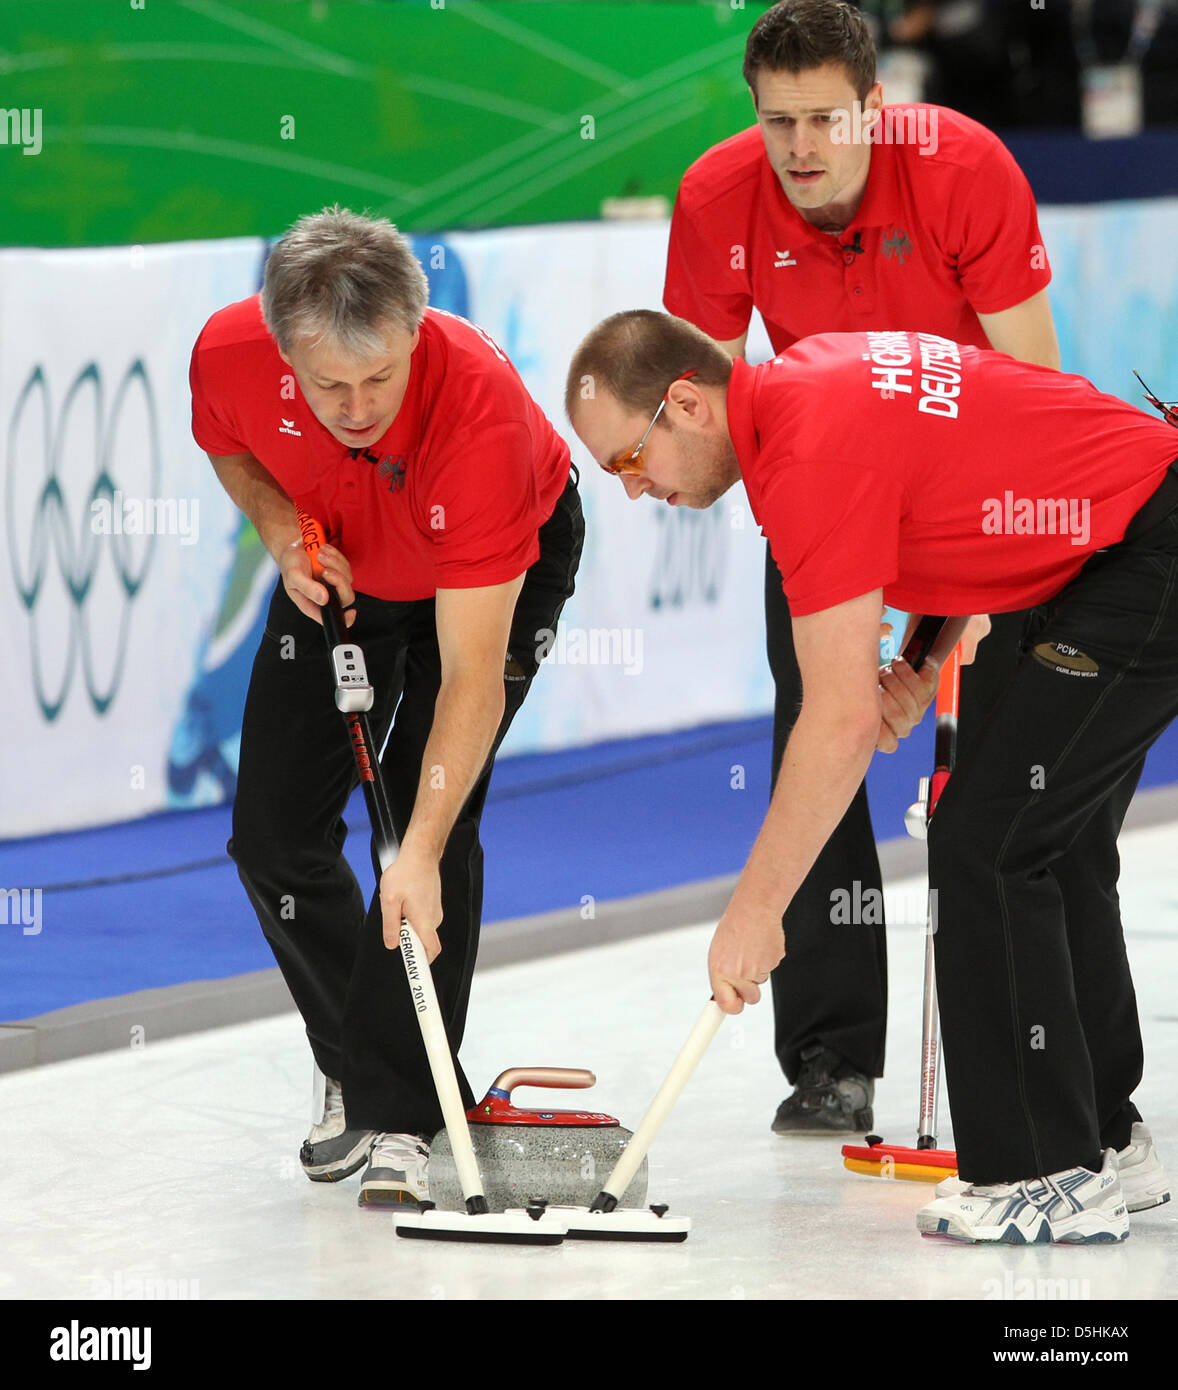 Andy Lang (R) of Germany releases his stone as Andreas Kempf (L) and Holger Hoehne guide it during Curling men's round robin session 3 at the Olympic Center during the Vancouver 2010 Olympic Games in Vancouver, Canada 17 February 2010. Germany's opponent was Sweden. Photo: Daniel Karmann Stock Photo